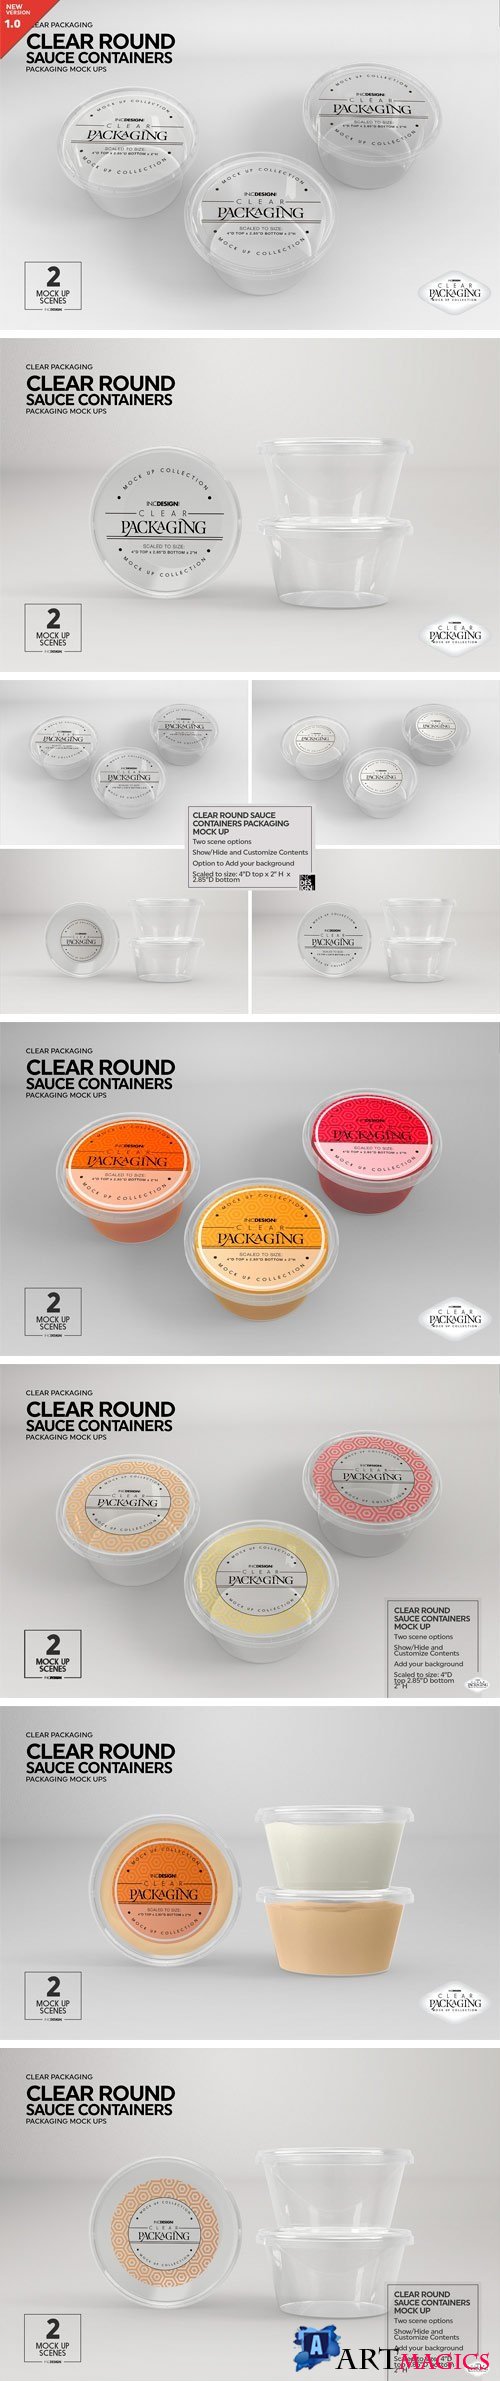 Clear Round Sauce Containers MockUp 2221803